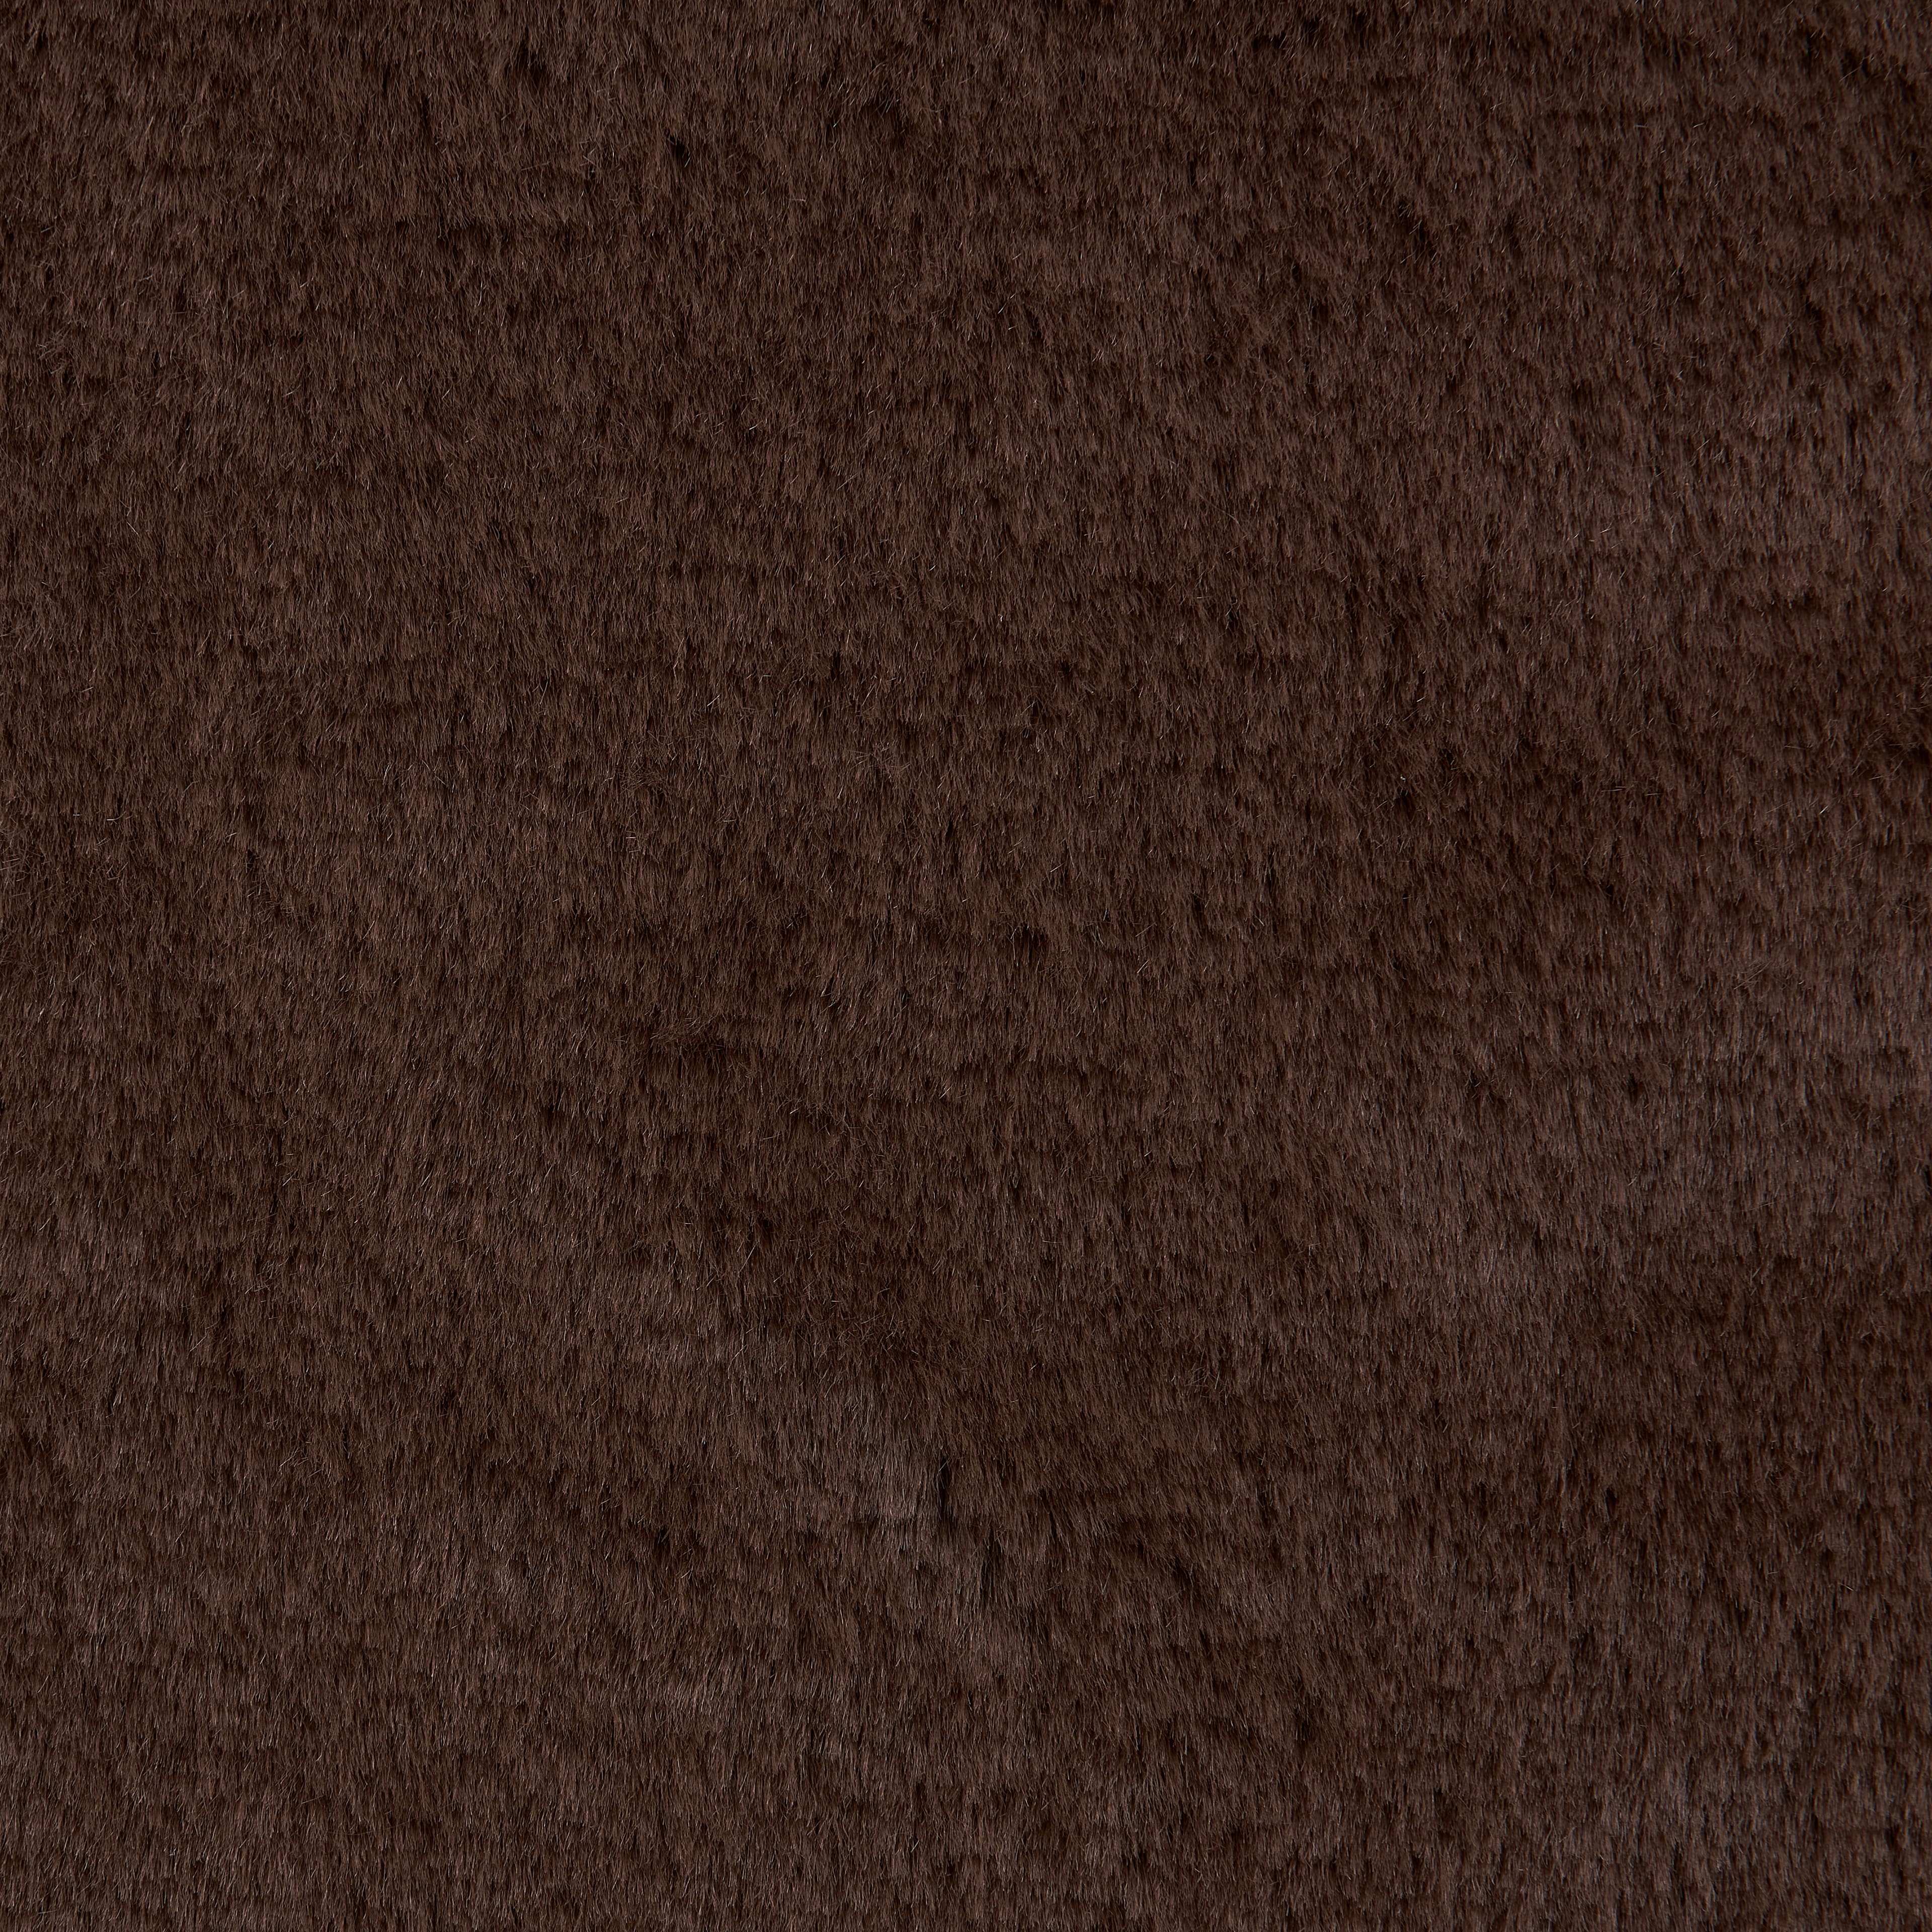 Brown Faux Fur Fabric Squares for Crafts, Sewing, Patchwork (18x18